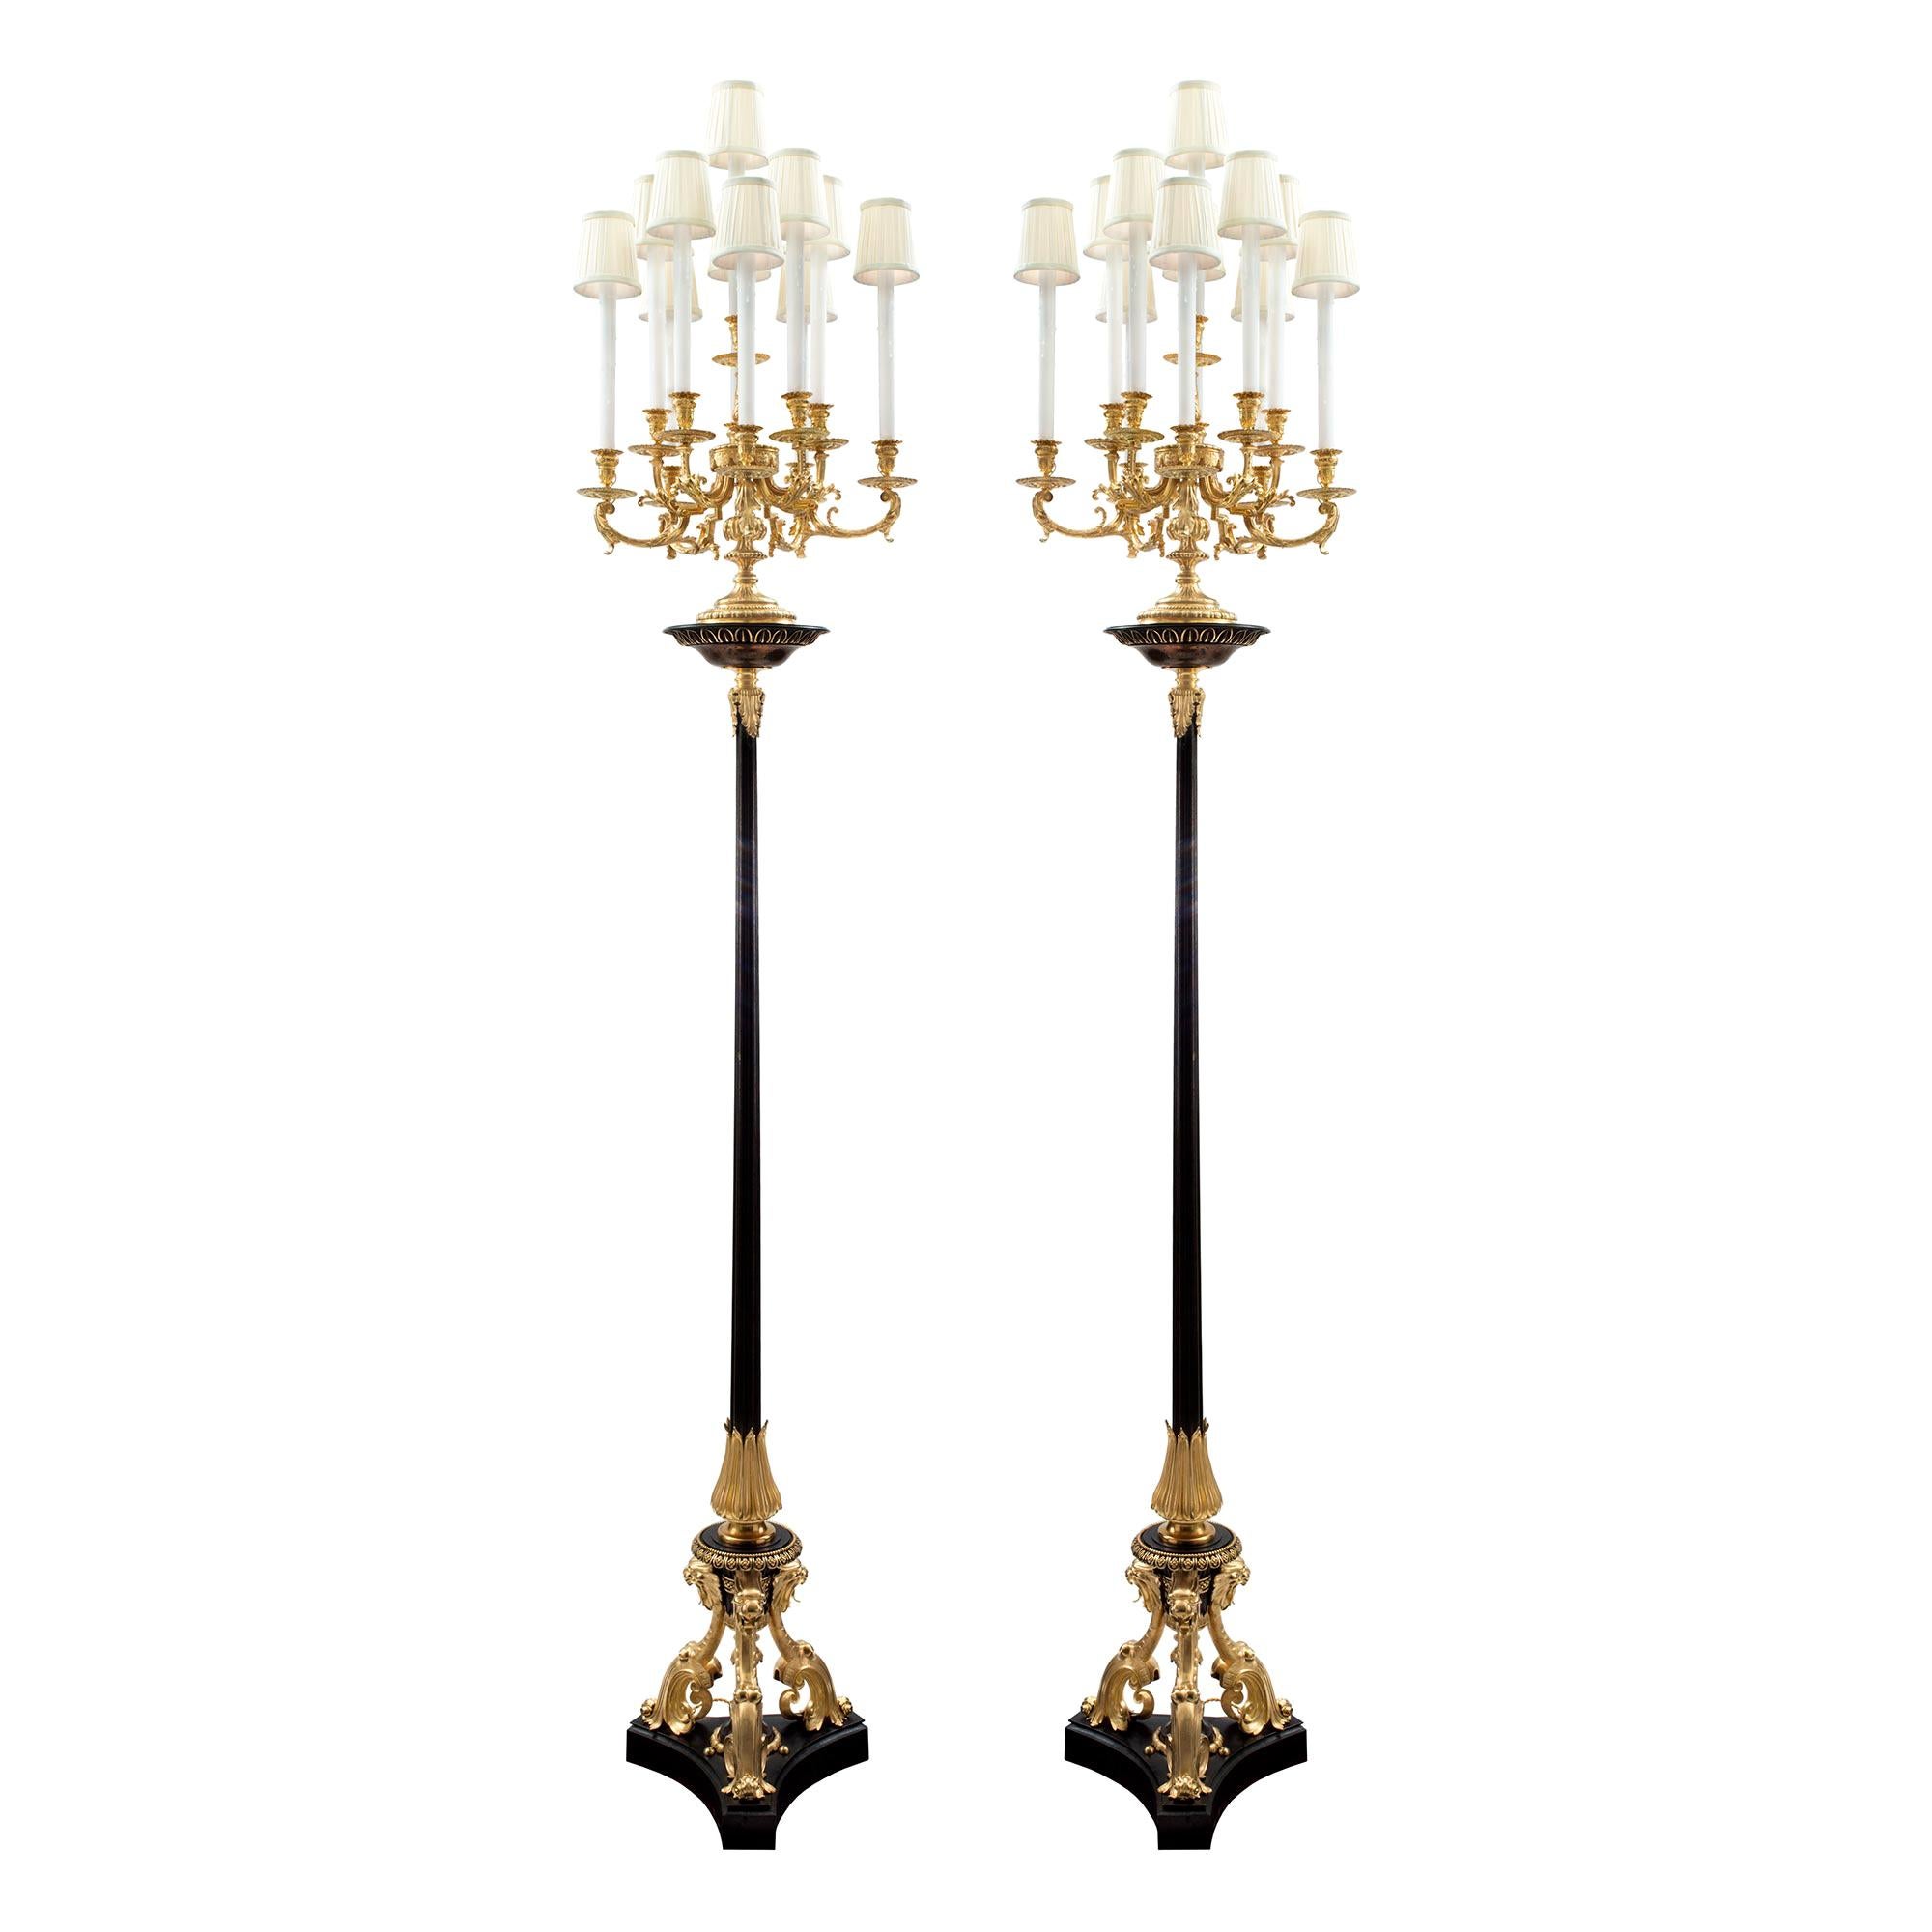 Pair of French 19th Century Renaissance Style Ormolu and Bronze Torchières For Sale